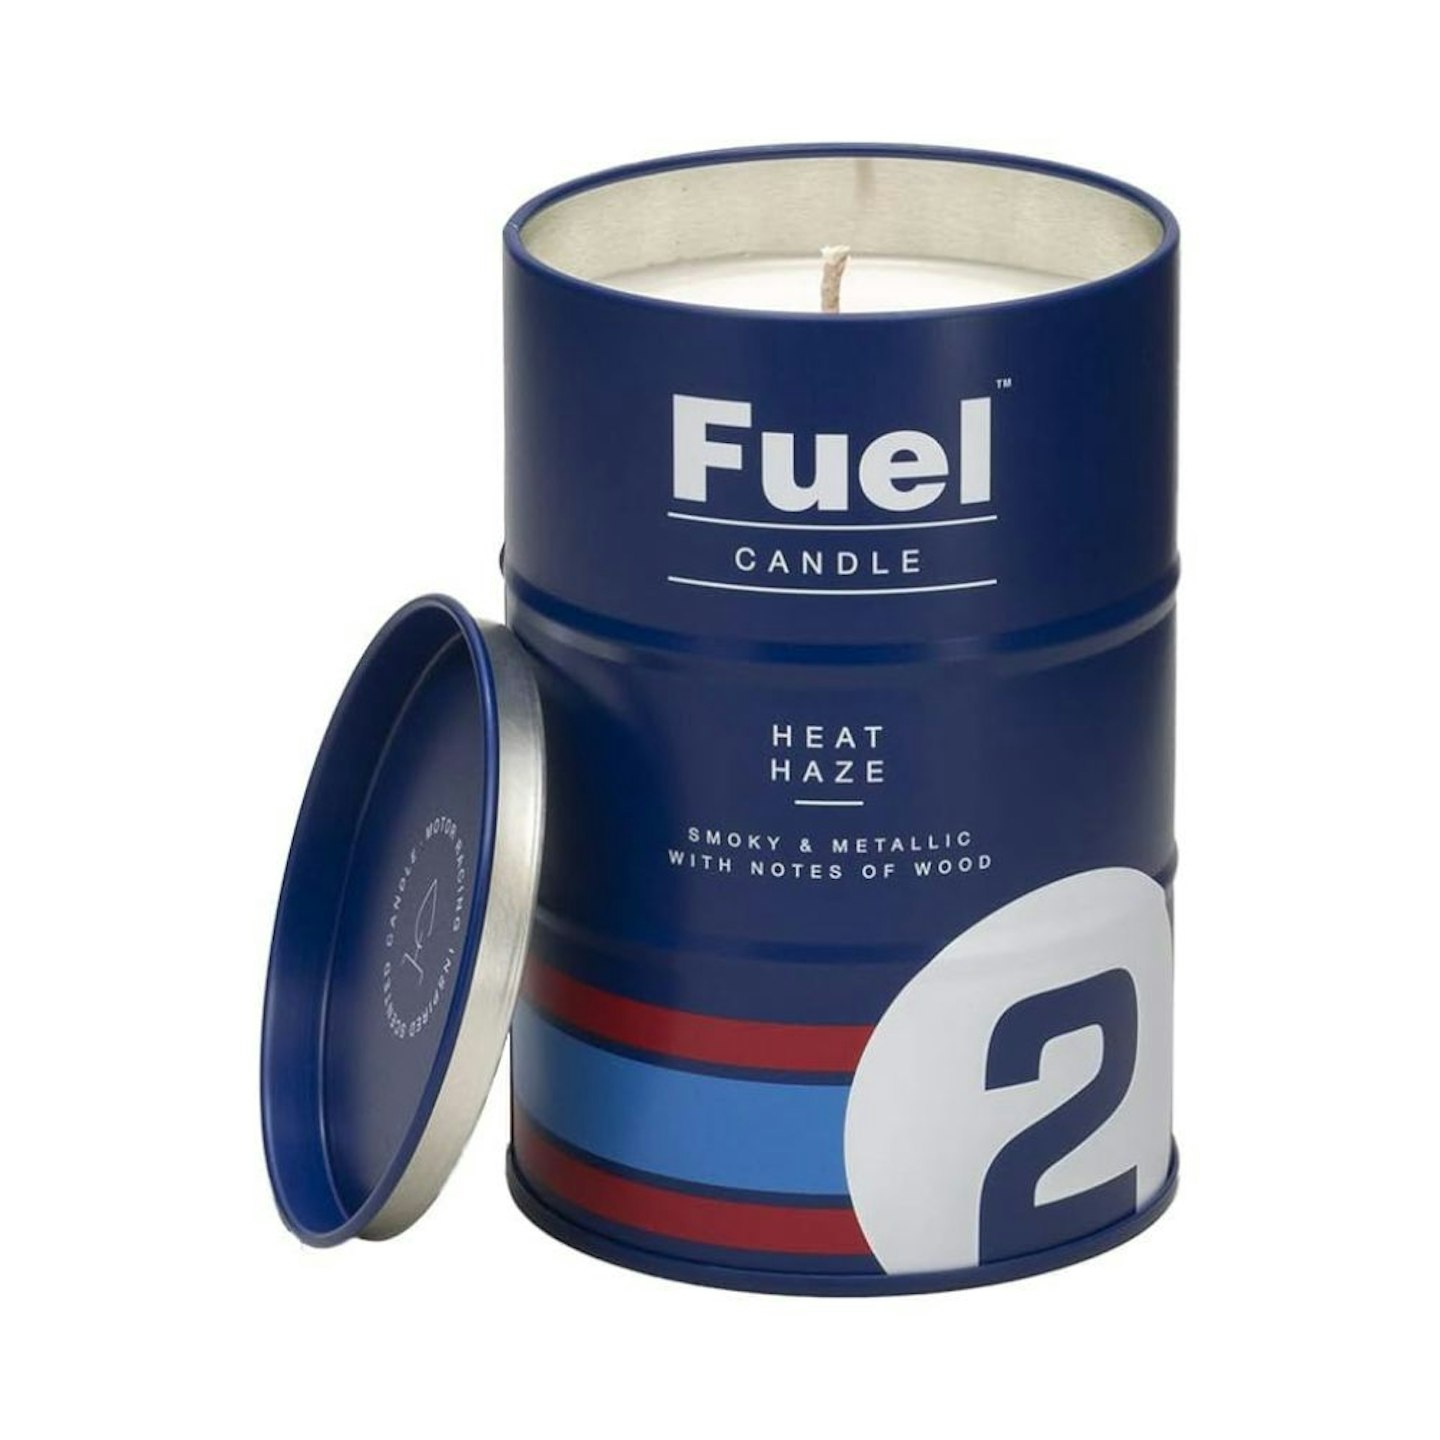  Luckies of London Fuel Candles stock image